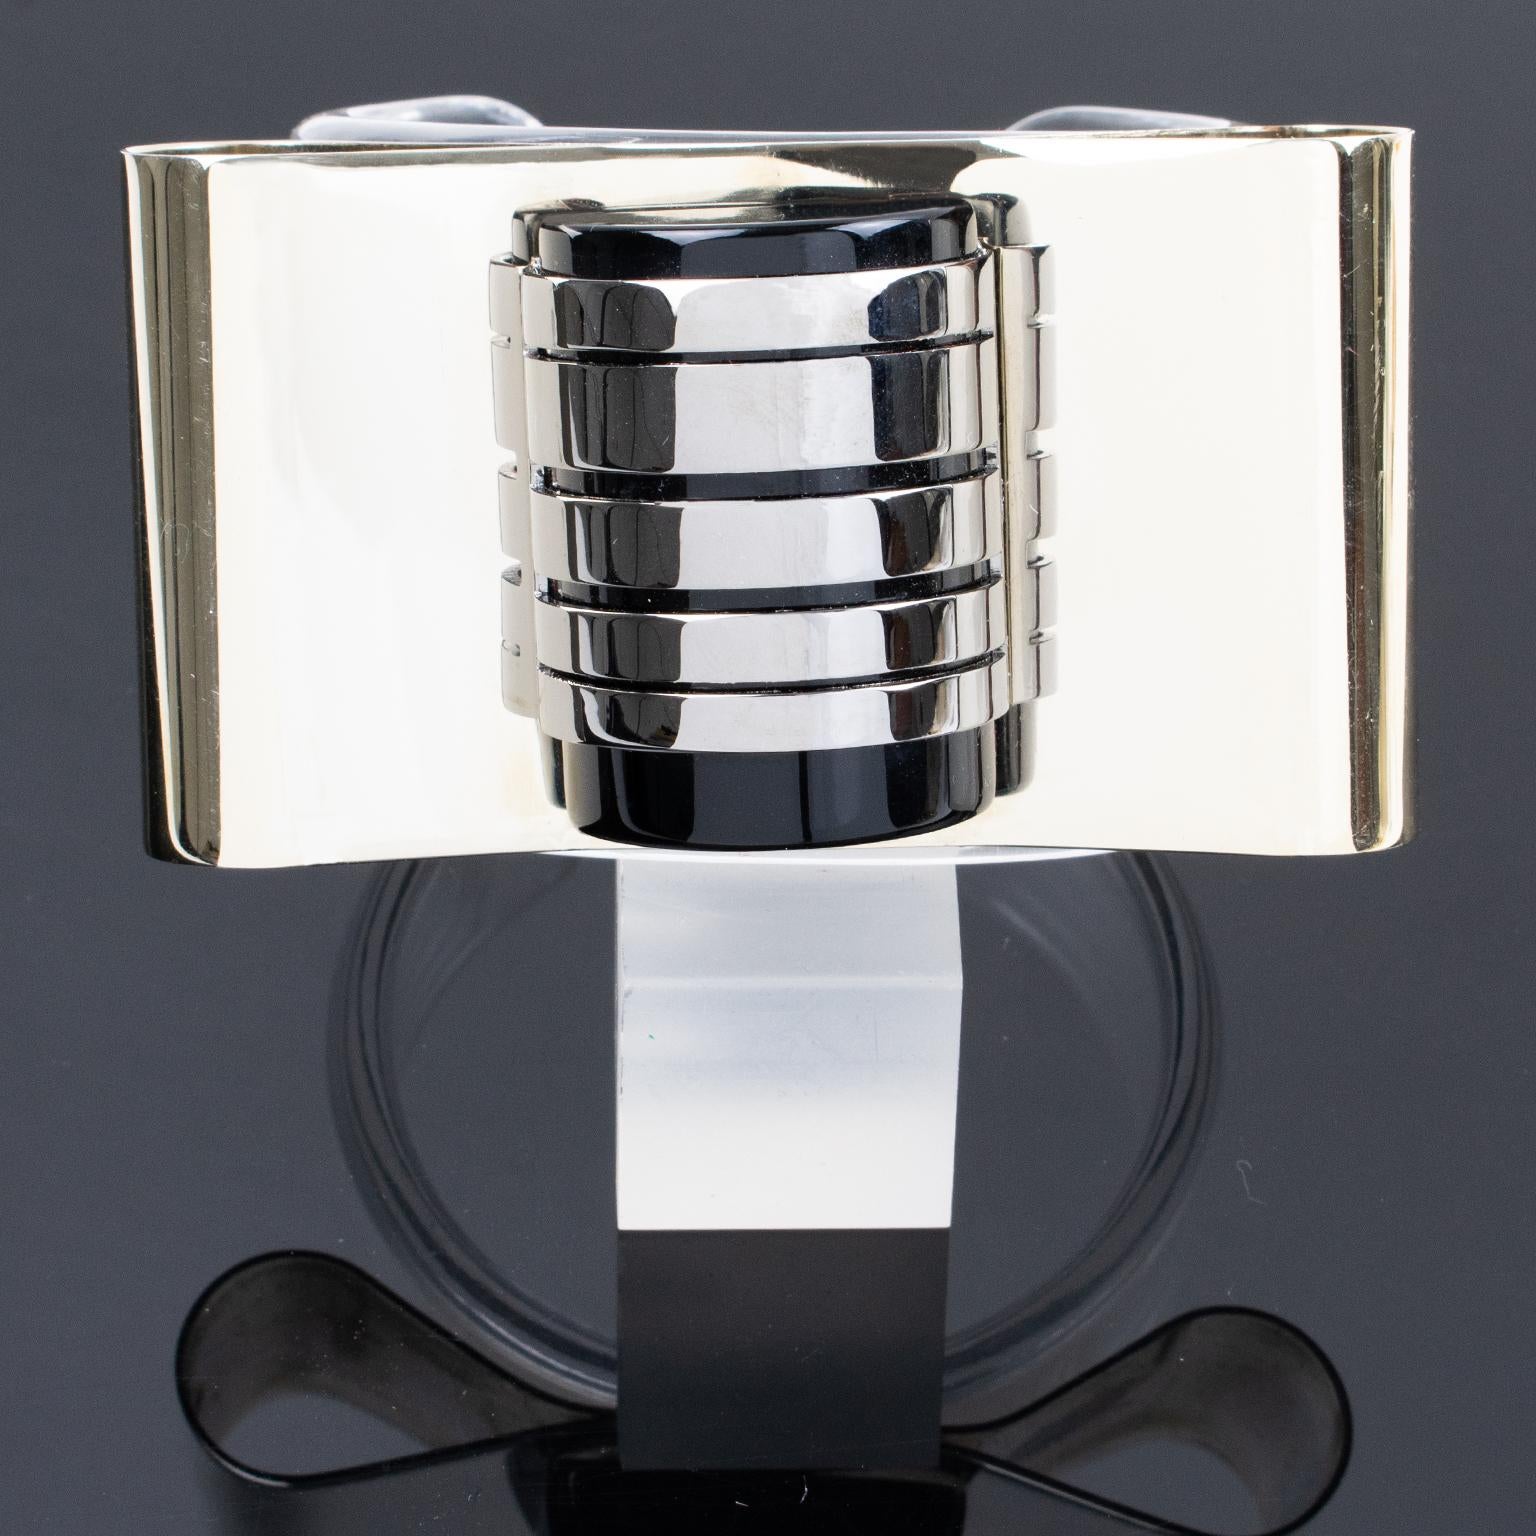 Gianfranco Ferre Art Deco Inspired Lucite and Metal Cuff Bracelet For Sale 8